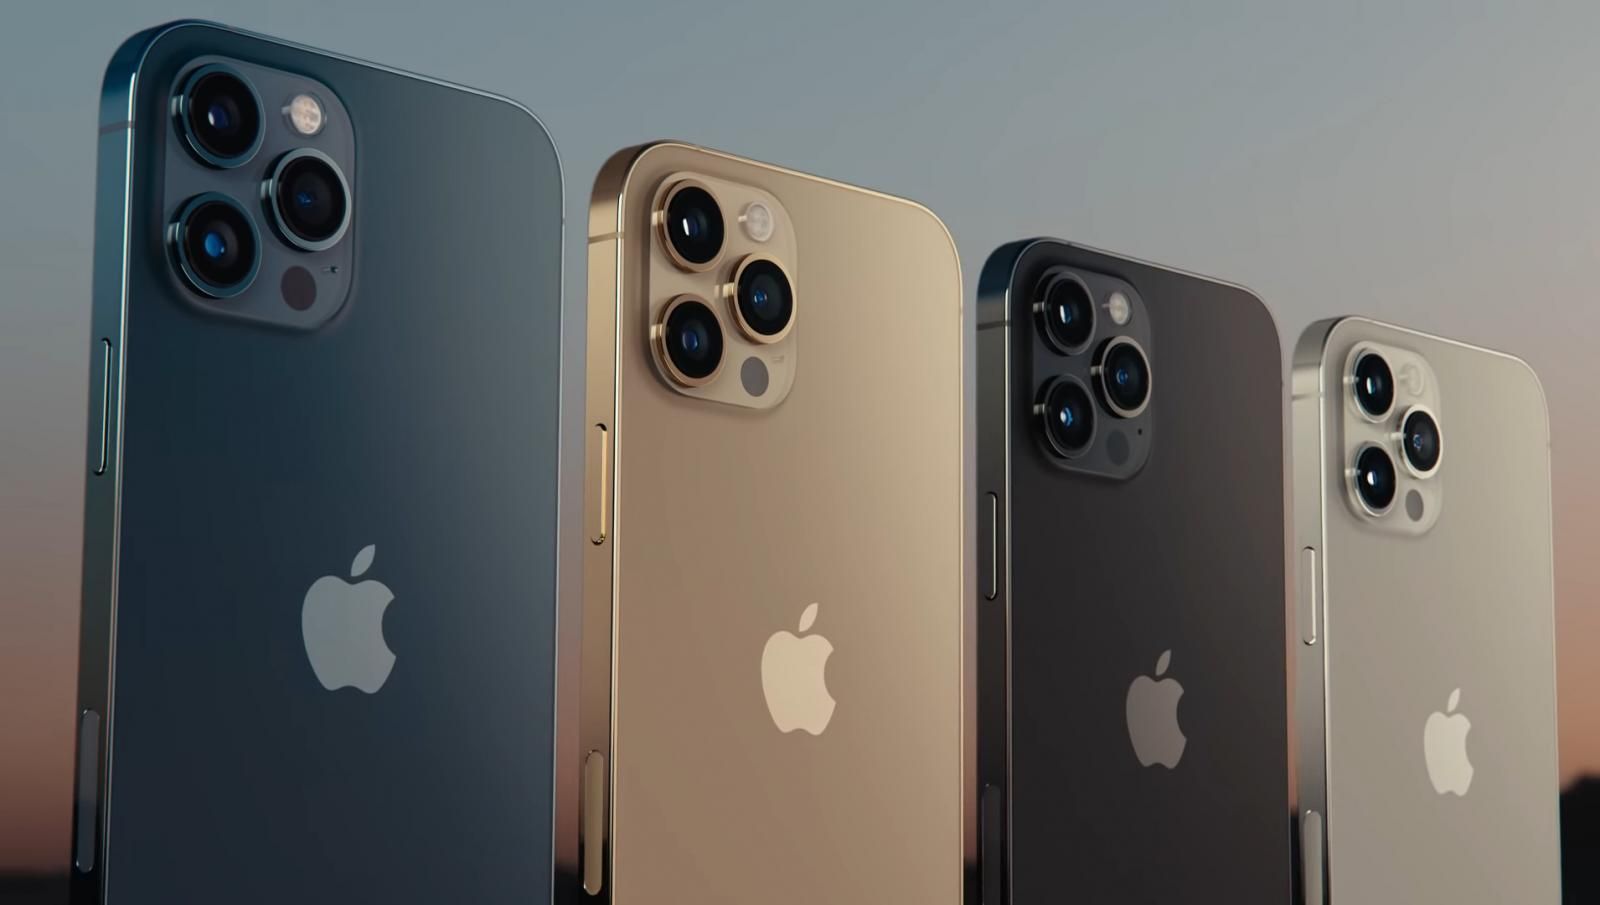 iPhone 12 Pro Max colors